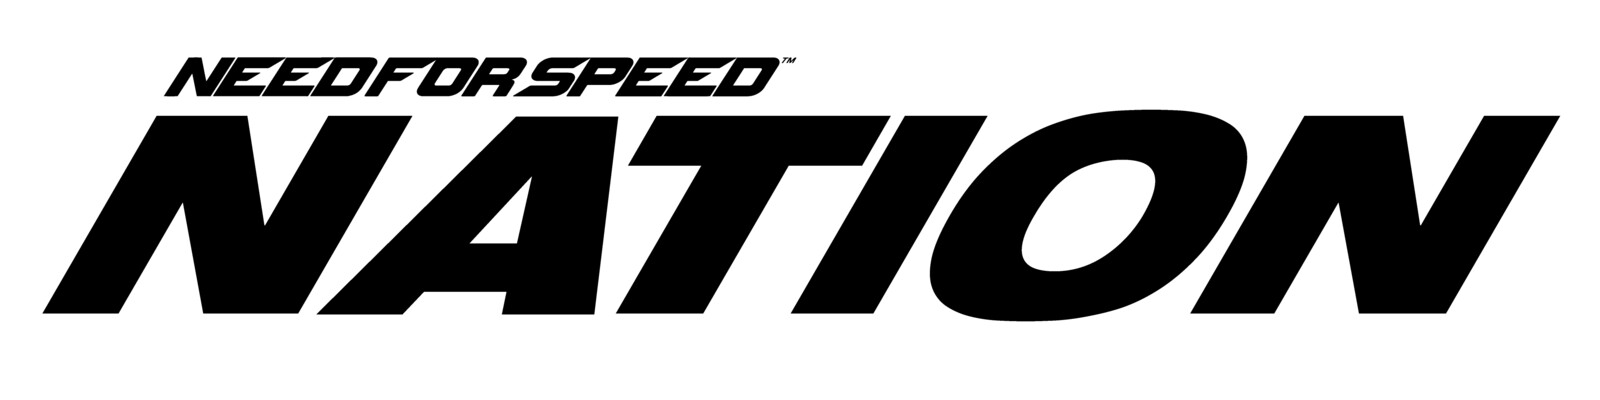 Need for Speed Nation (based on the Nation project by Bourne15Live, Logo design by agenTOUGH).